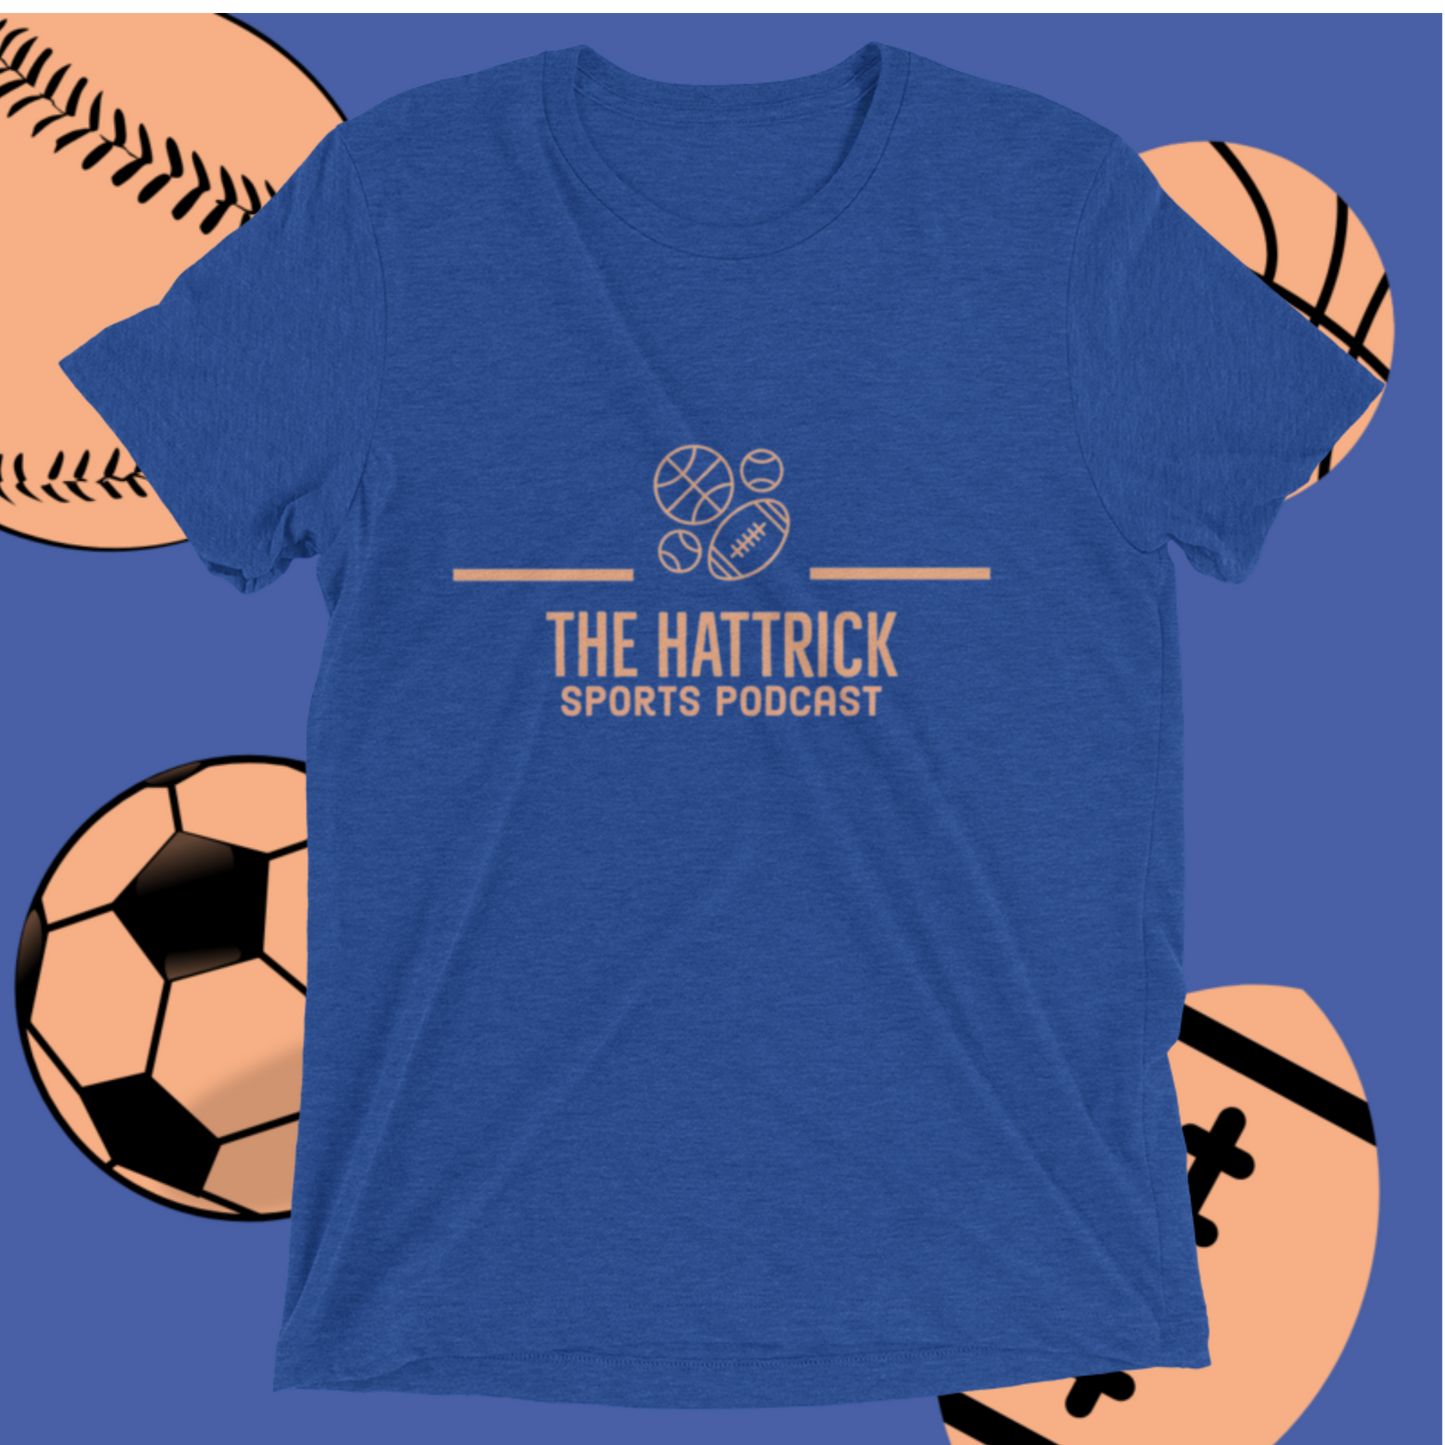 The HatTrick Sports Podcast Tee Shirt